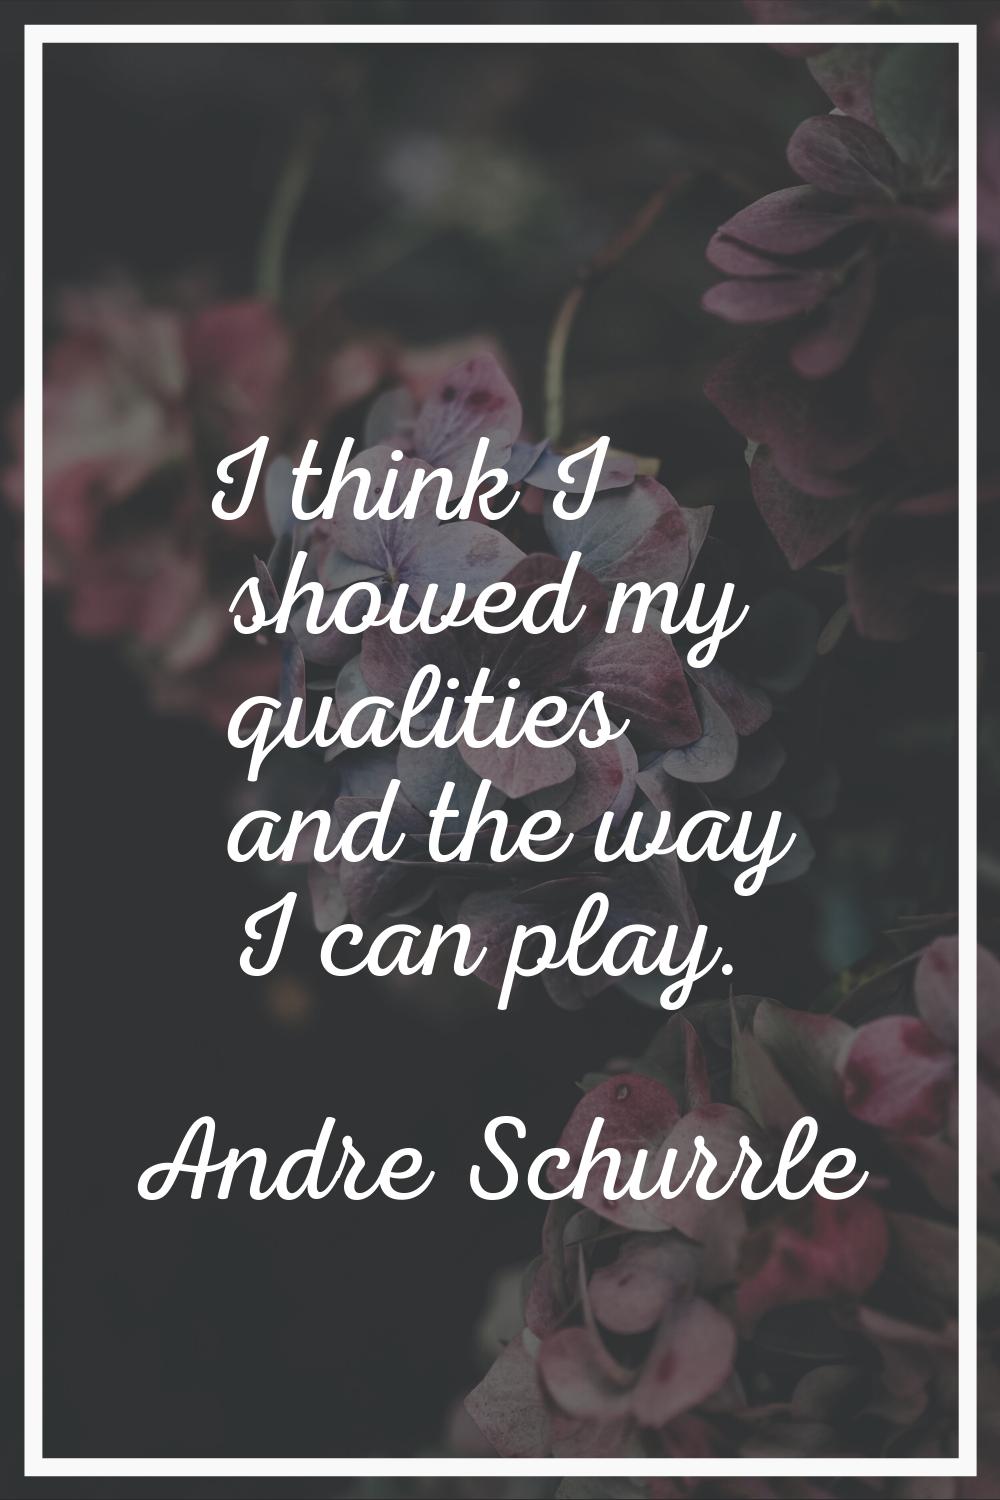 I think I showed my qualities and the way I can play.